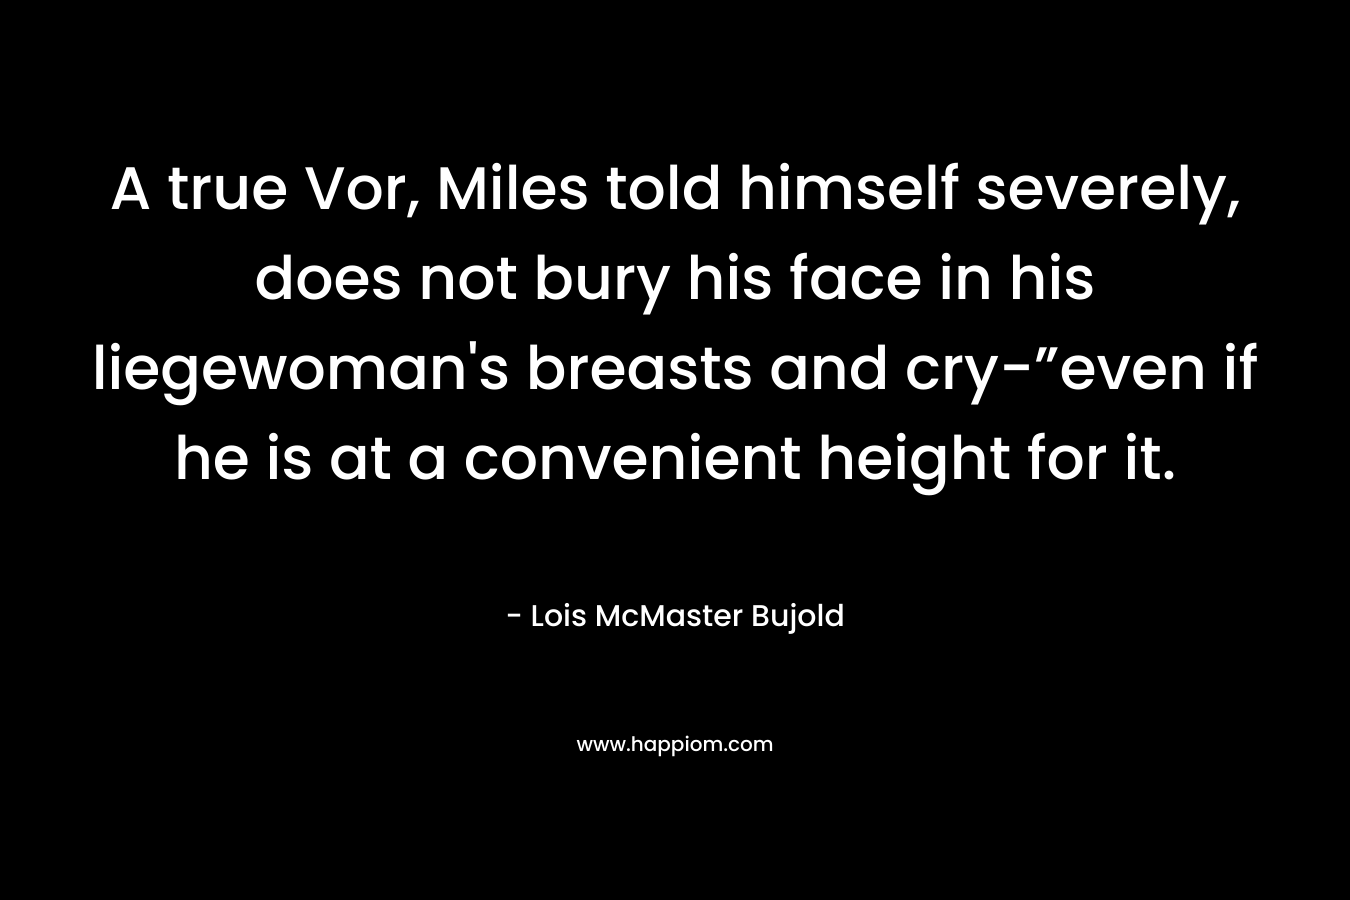 A true Vor, Miles told himself severely, does not bury his face in his liegewoman’s breasts and cry-”even if he is at a convenient height for it. – Lois McMaster Bujold